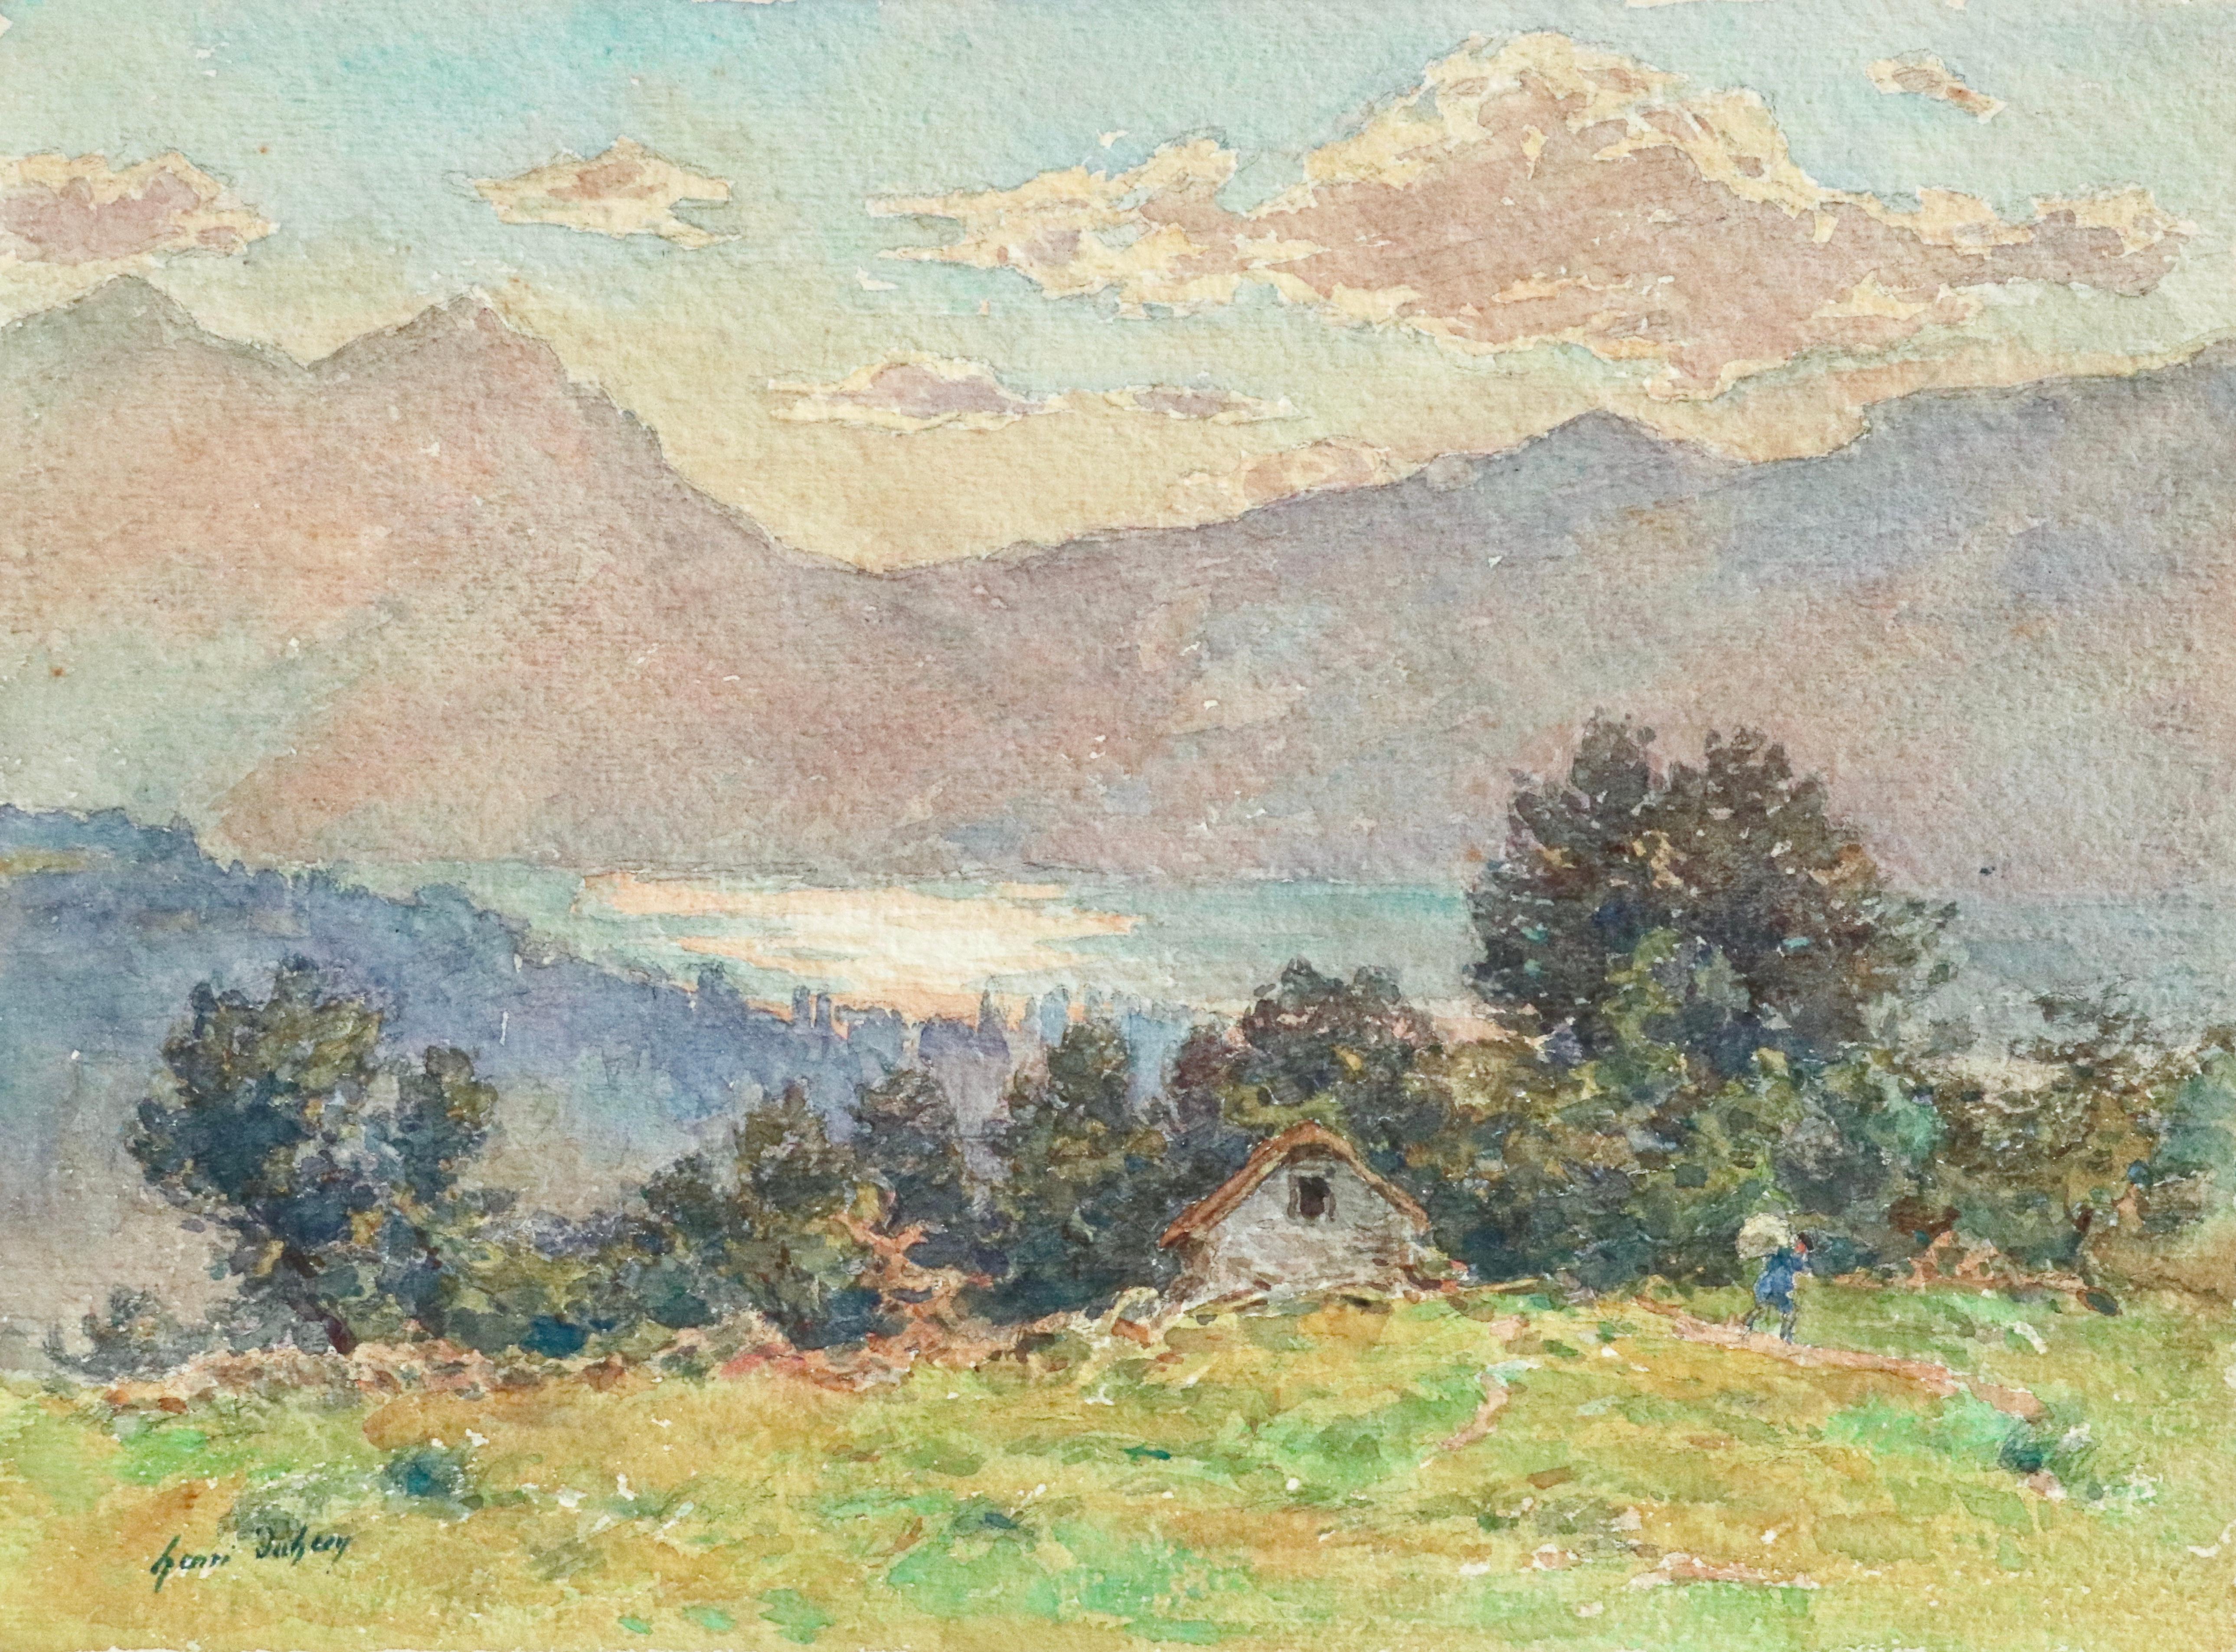 Watercolour on paper circa 1925 by French painter Henri Duhem, depicting a figure by a house overlooking Lac Neuchâtel in Switzerland and mountains beyond. Signed lower left. This painting is not currently framed but a suitable frame can be sourced